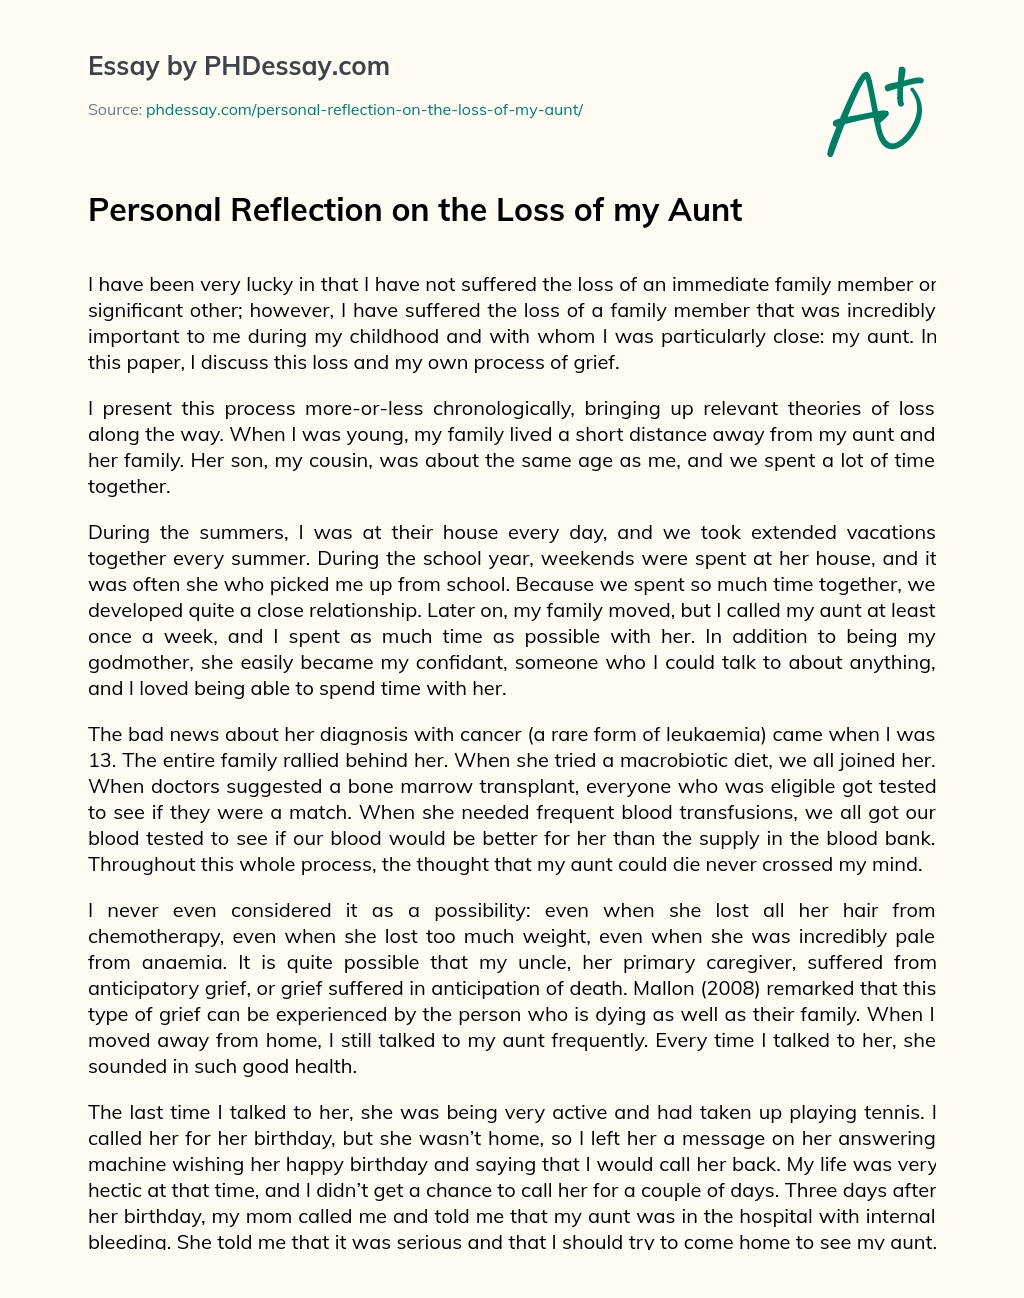 Personal Reflection on the Loss of my Aunt essay